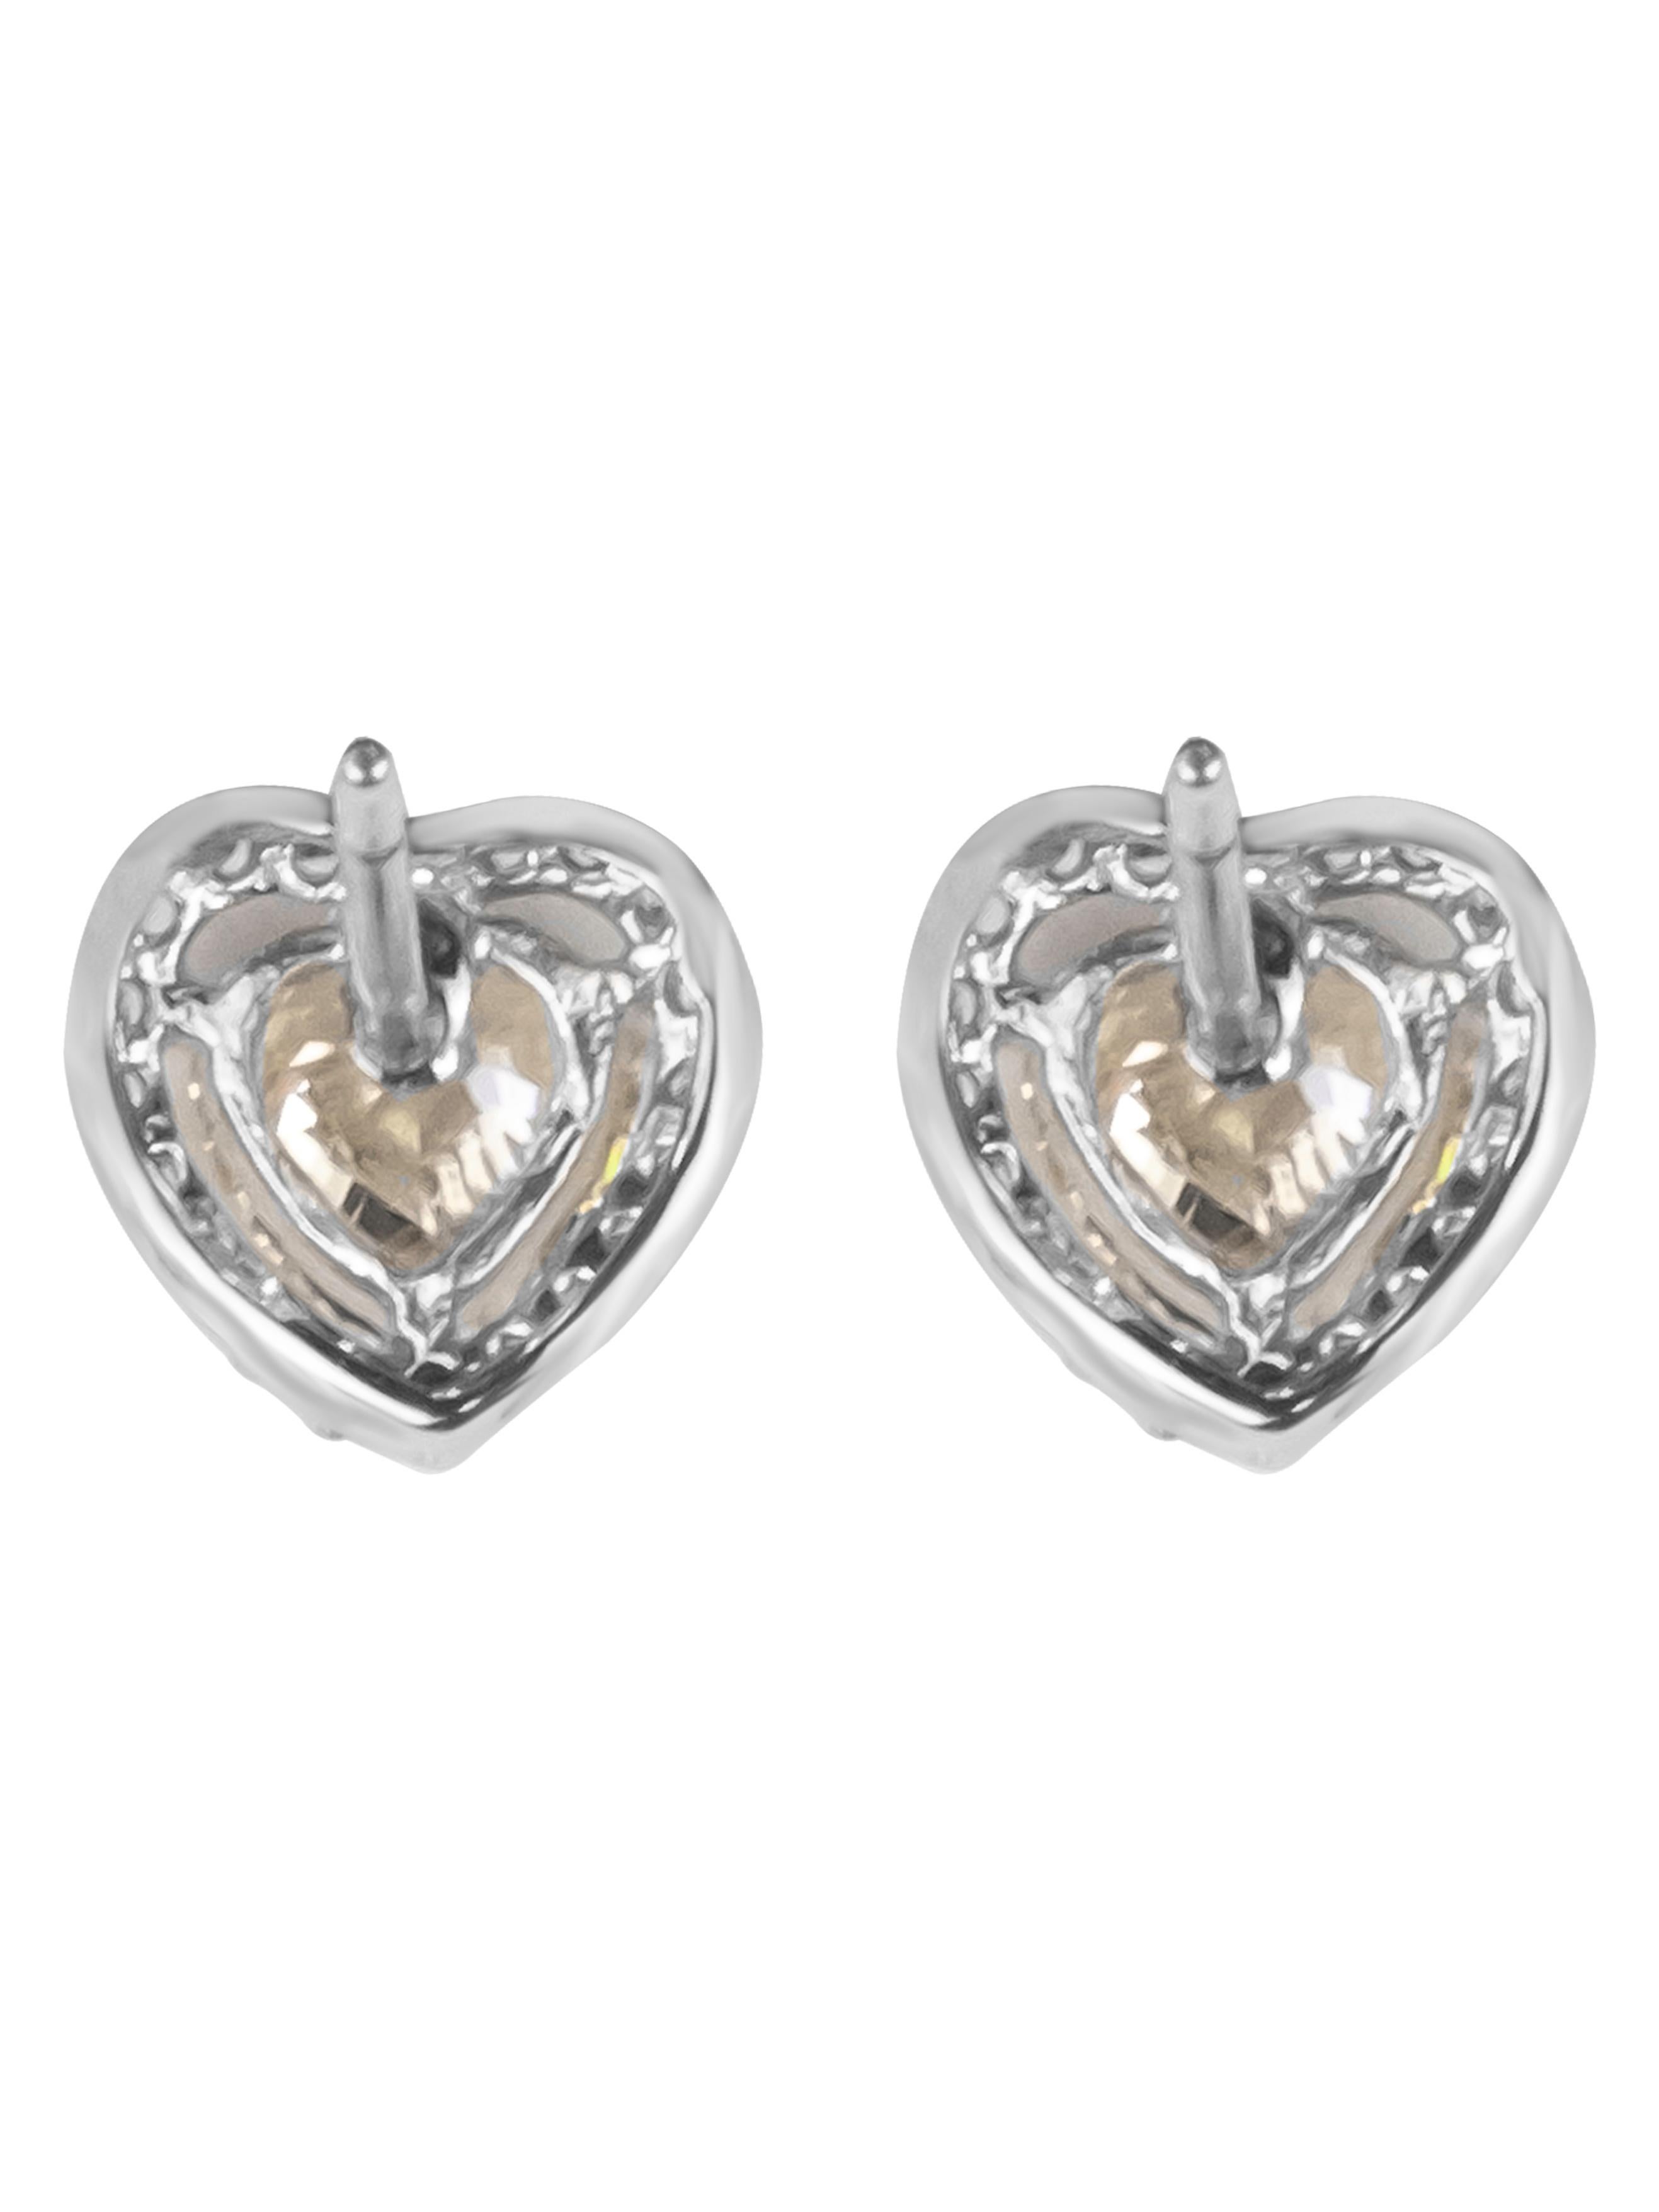 The Radiant Heart is delicately crafted to accentuate and elevate any outfit. Allowing you to go from office to after-hours with polish and style - the ultimate 9 to 9. Add the matching Radiant Heart Necklace to complete the look. 

Sterling Silver